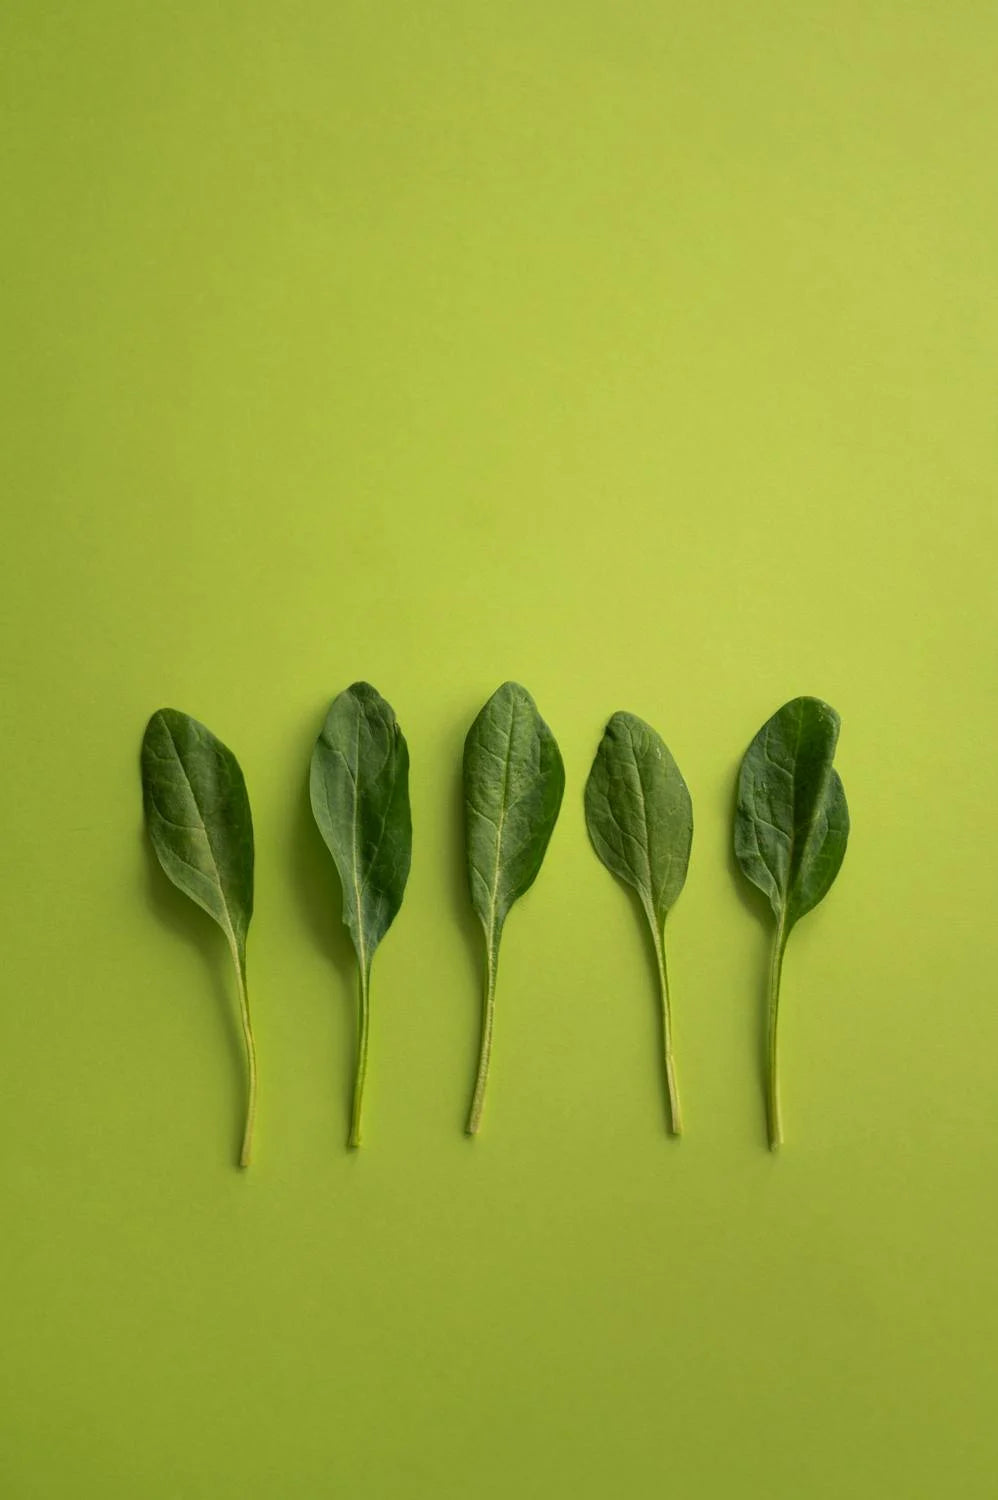 Leaves of spinach on green backdrop